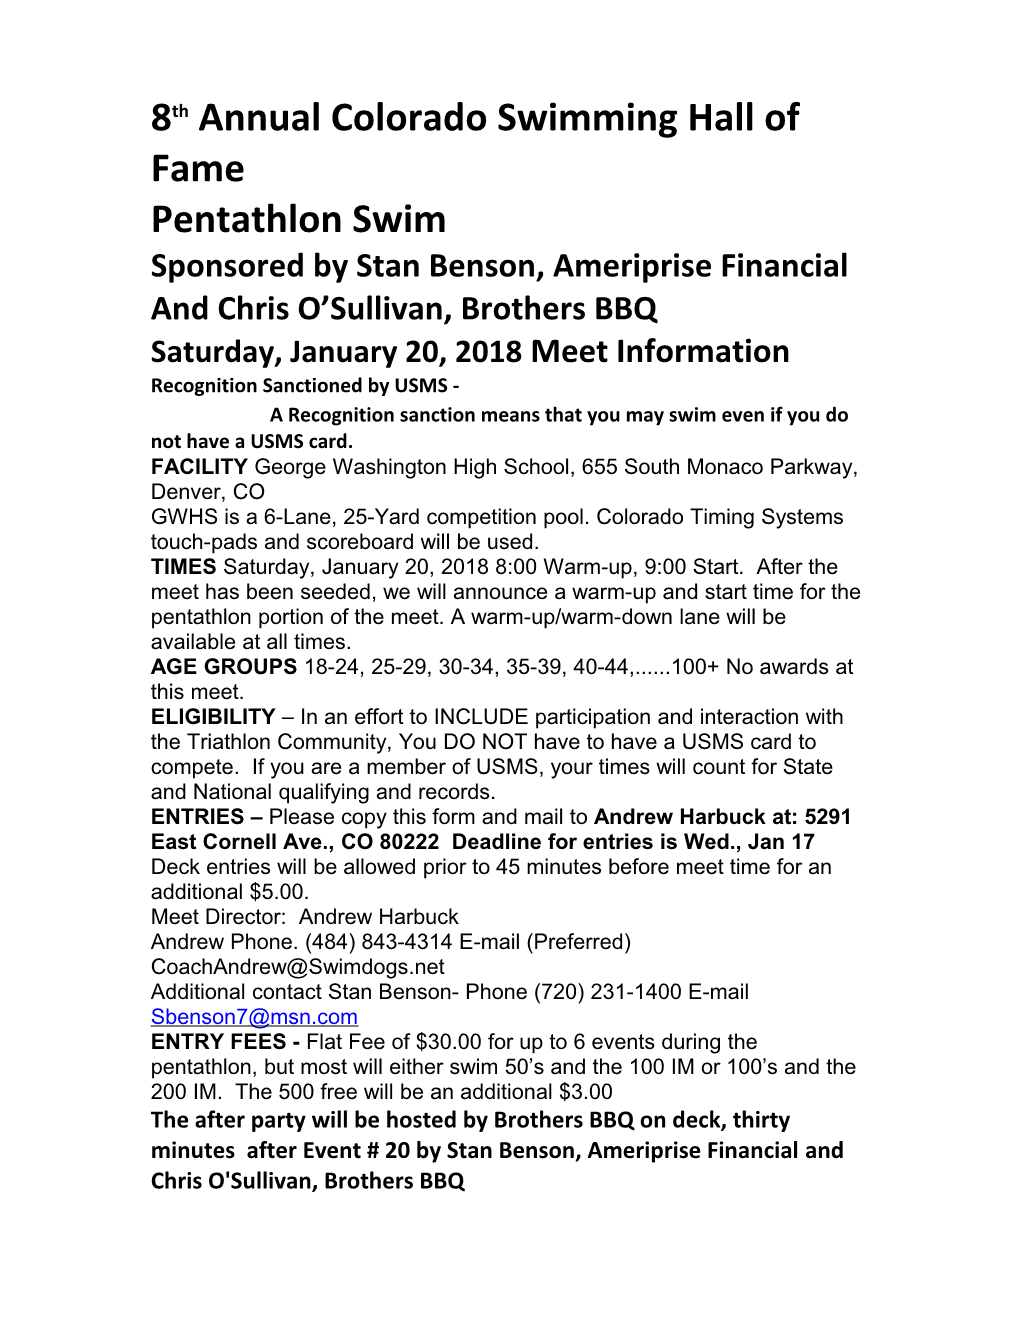 8Th Annual Colorado Swimming Hall of Fame